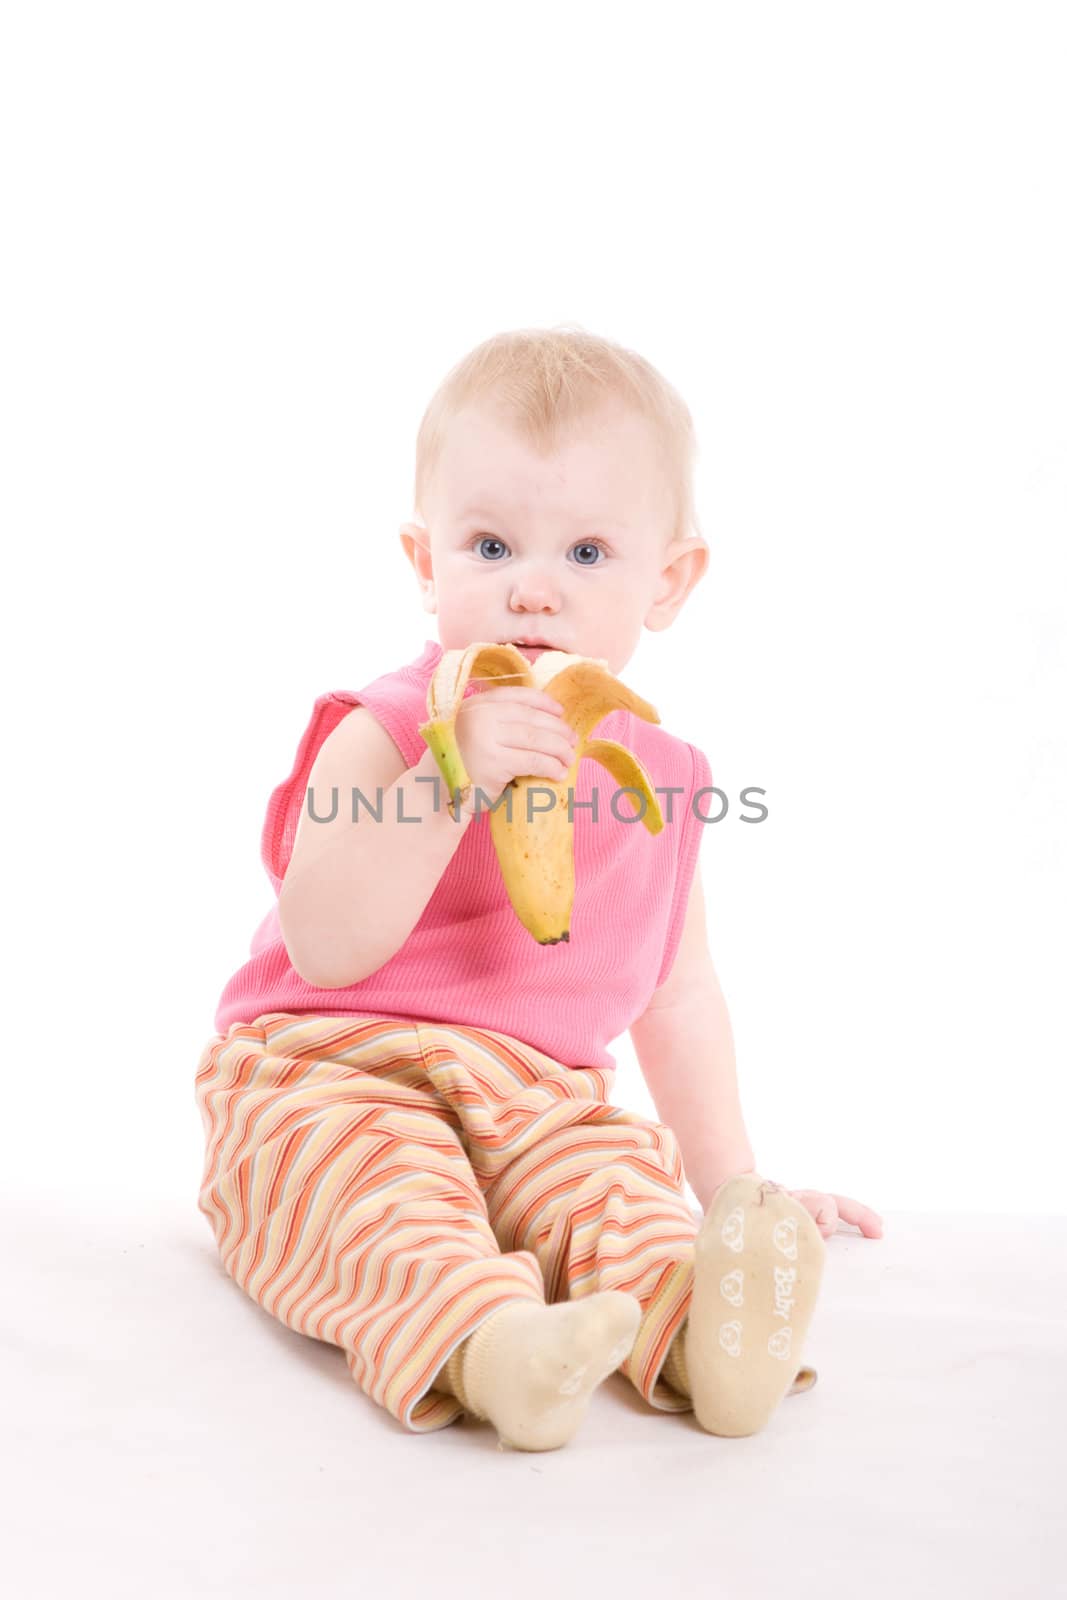 a small surprised girl eating a banana on the floor by vsurkov